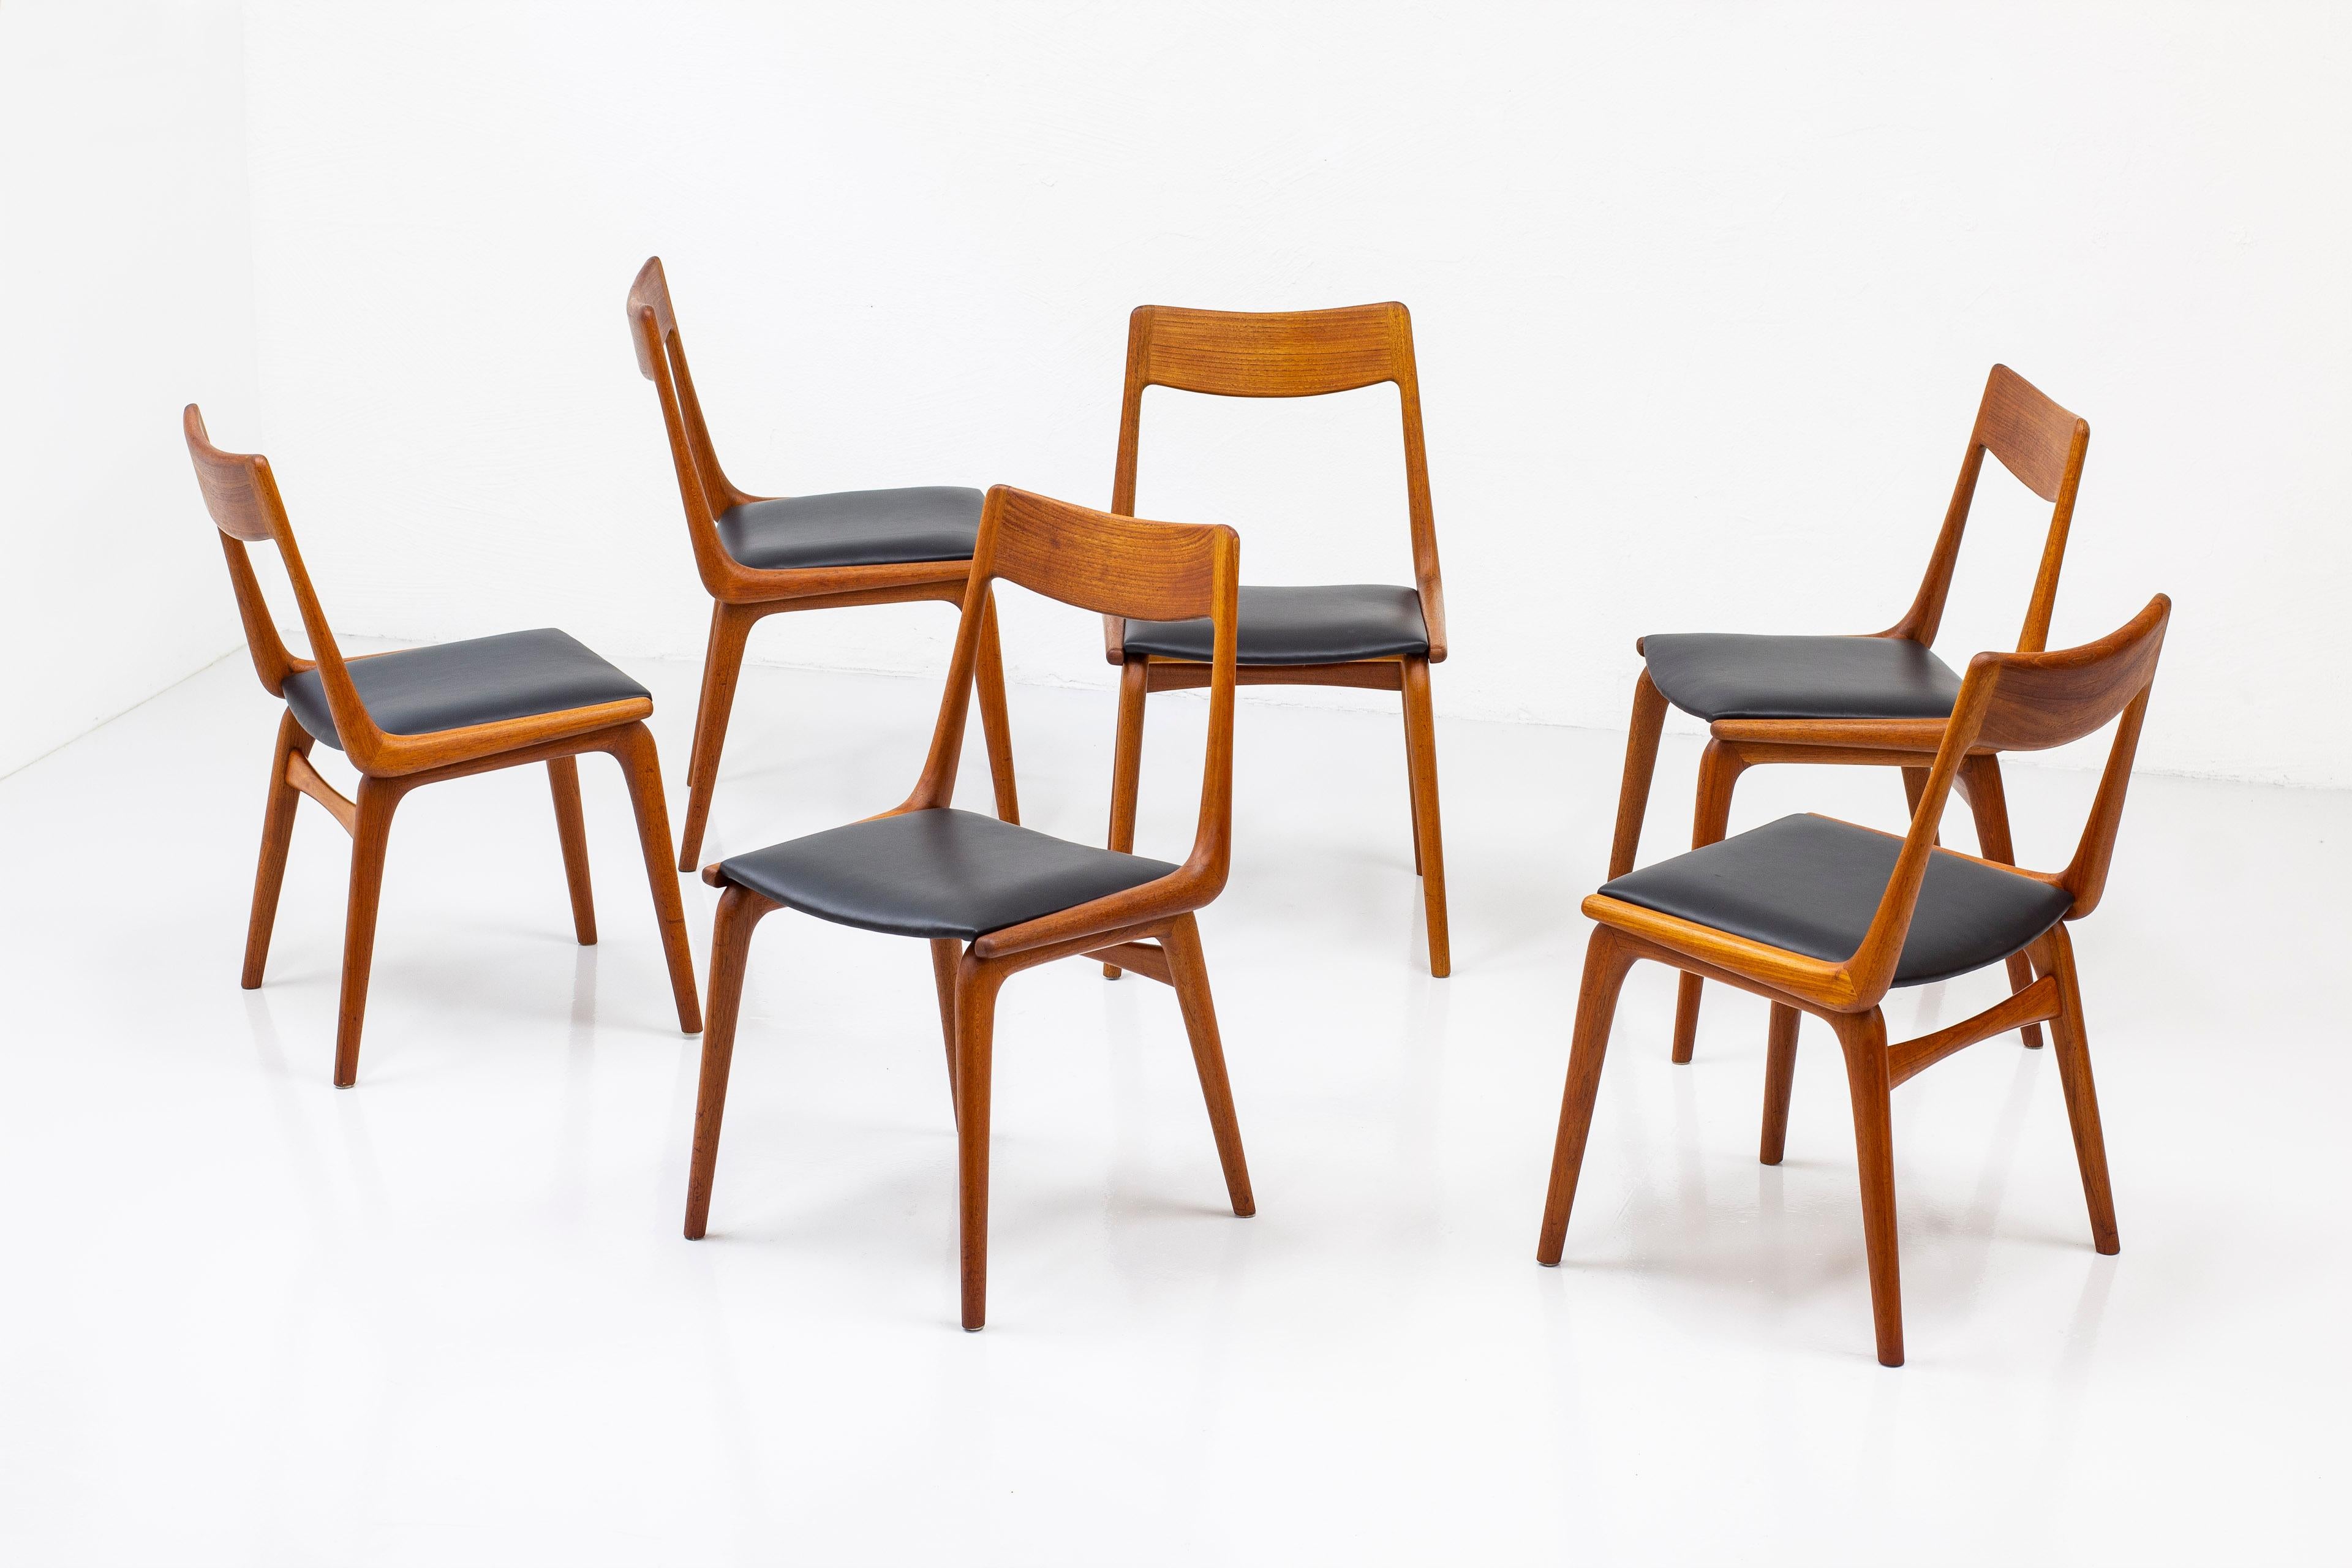 Set of ten chairs by Alfred Christensen. Produced by Slagelse Möbelverk in Denmark during the 1950s. Solid teak fram with new upholstery in black leather. Fully restored in excellent condition. Light age related patina due to age and use.

Price